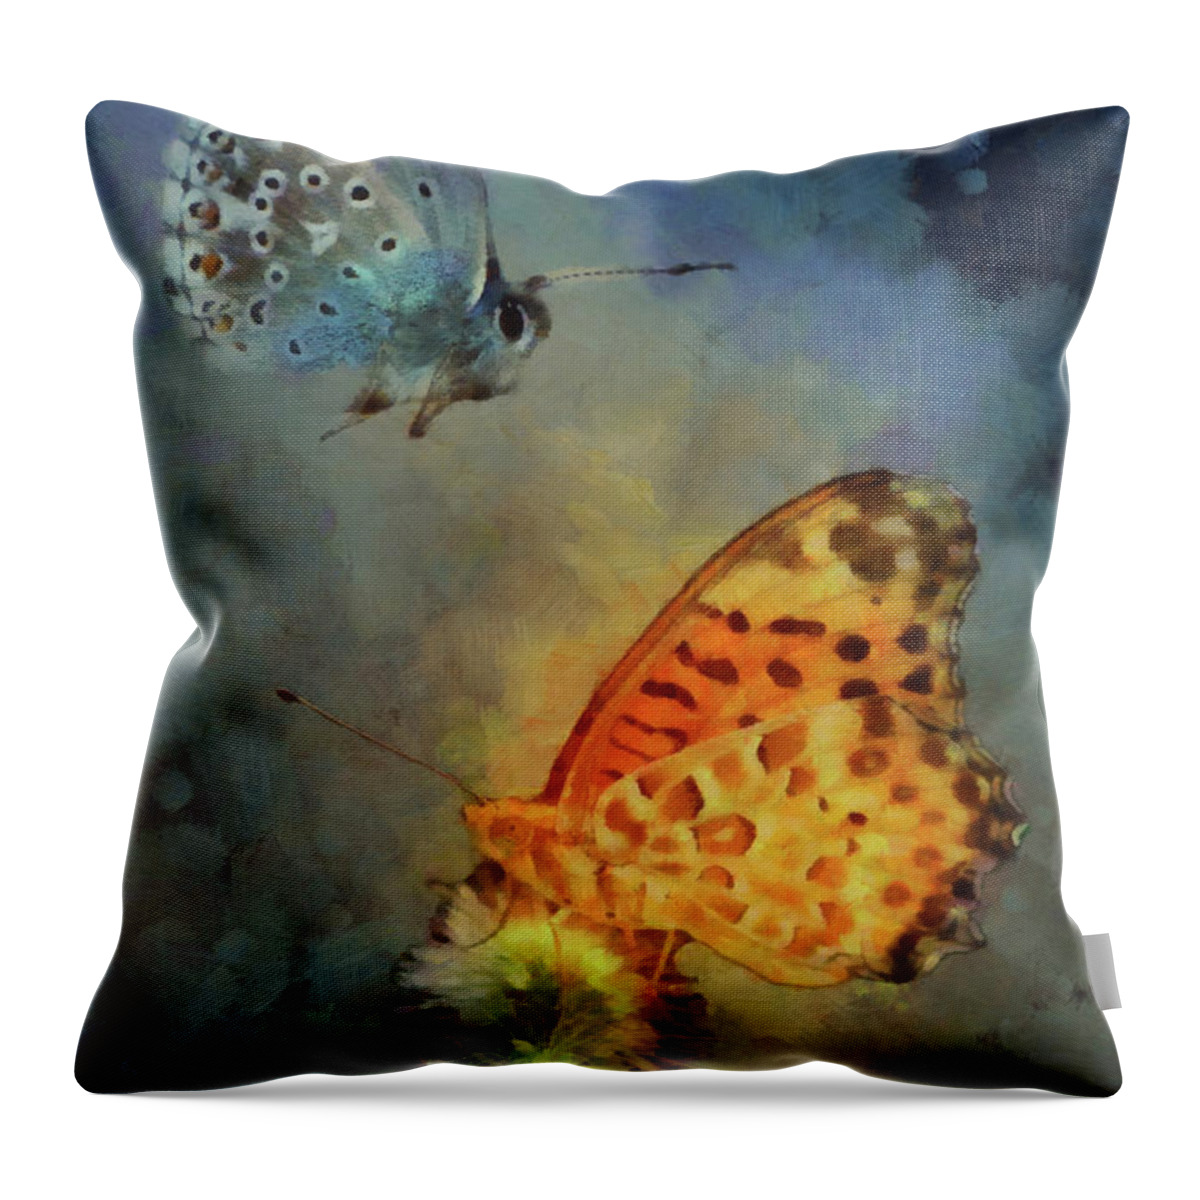 Butterflies Throw Pillow featuring the digital art Silver And Gold by Theresa Campbell